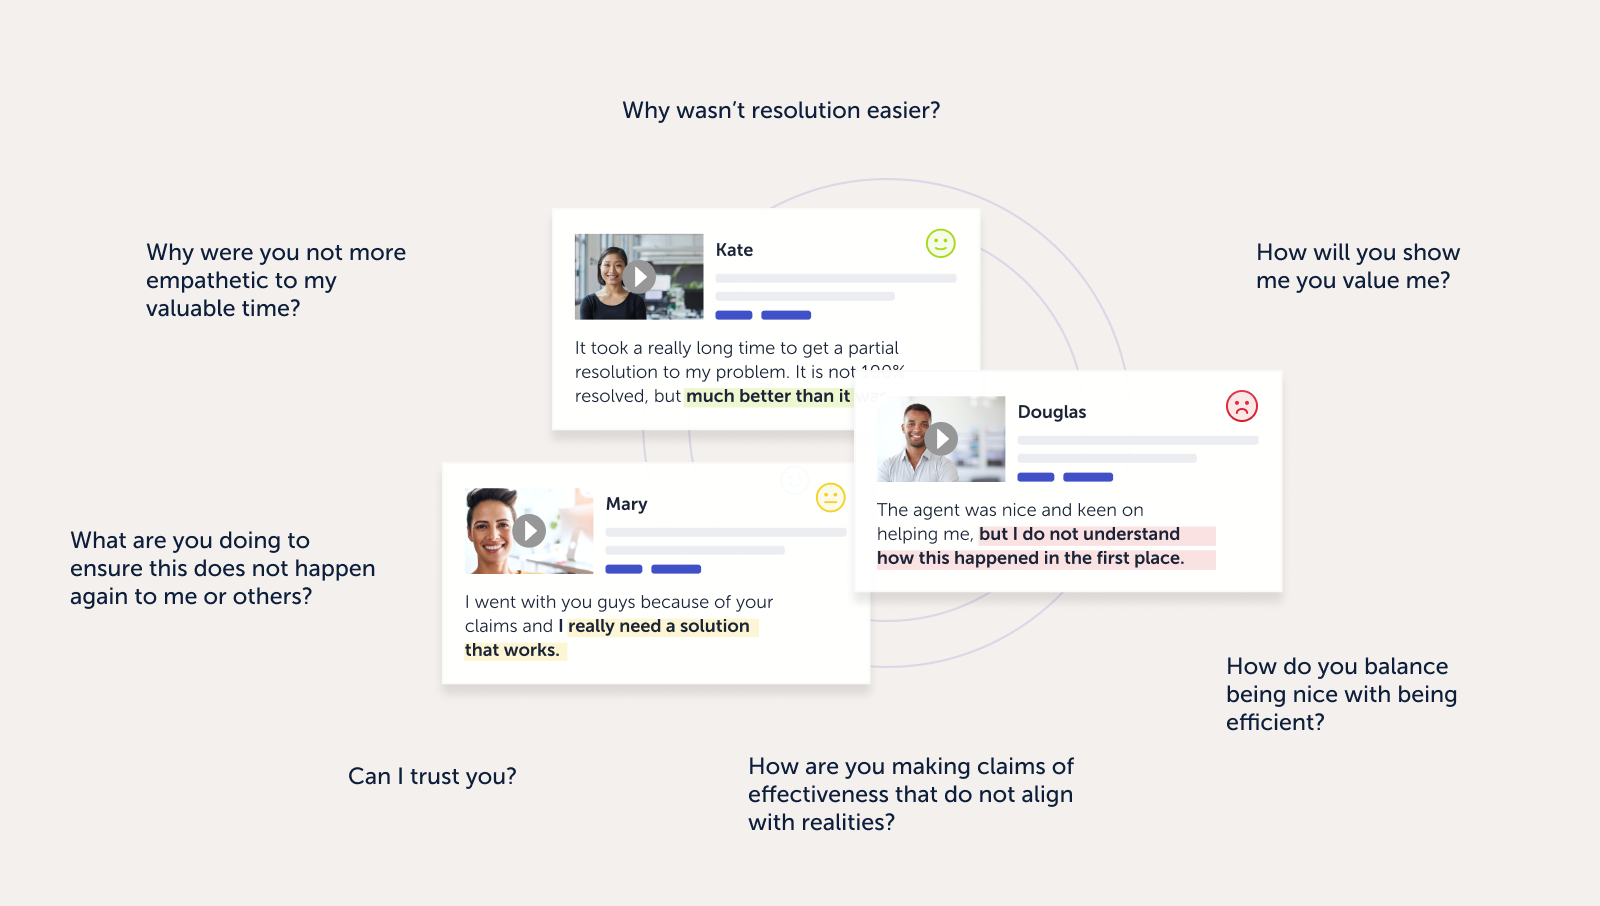 Image depicts the real questions behind the feedback given, such as the commenter writing,“It took a really long time to get a resolution to my problem. It is not 100% resolved, but it’s much better than it was.” The surrounding questions are, “Why wasn’t resolution easier?” and “How will you show me you value me?”